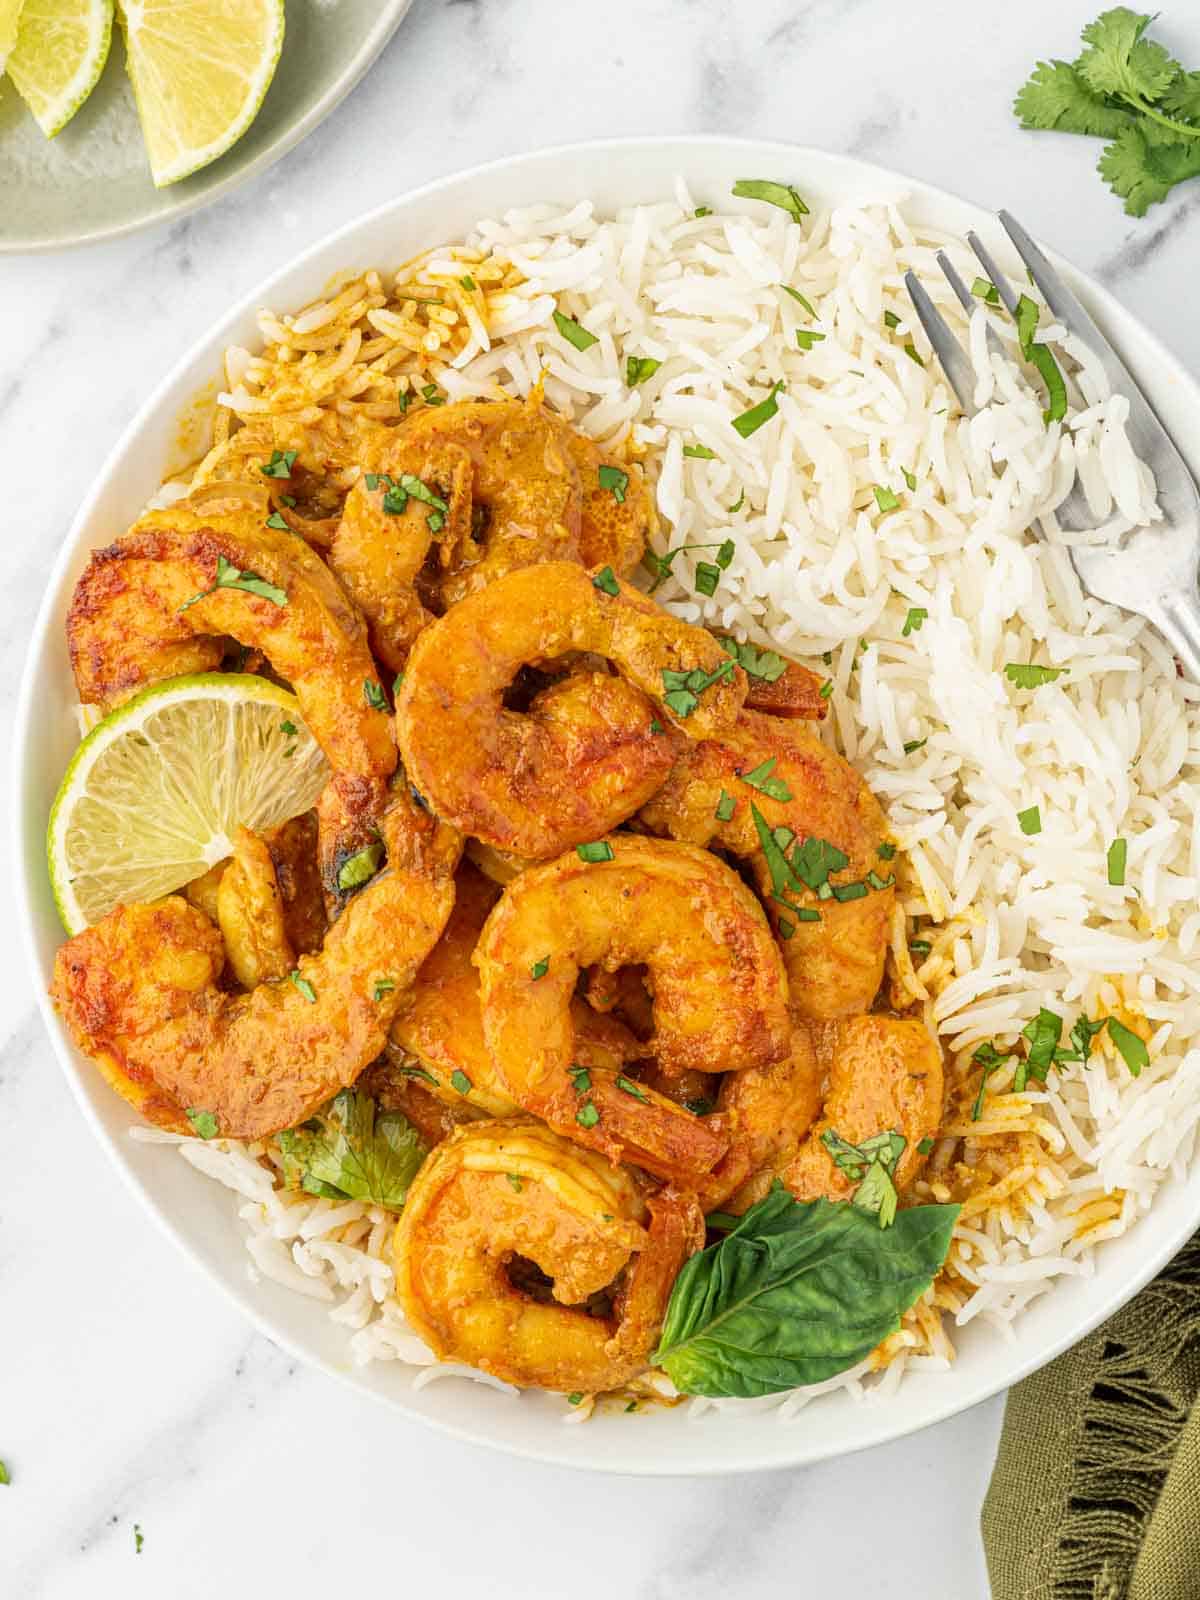 Shrimp on a plate with white rice.